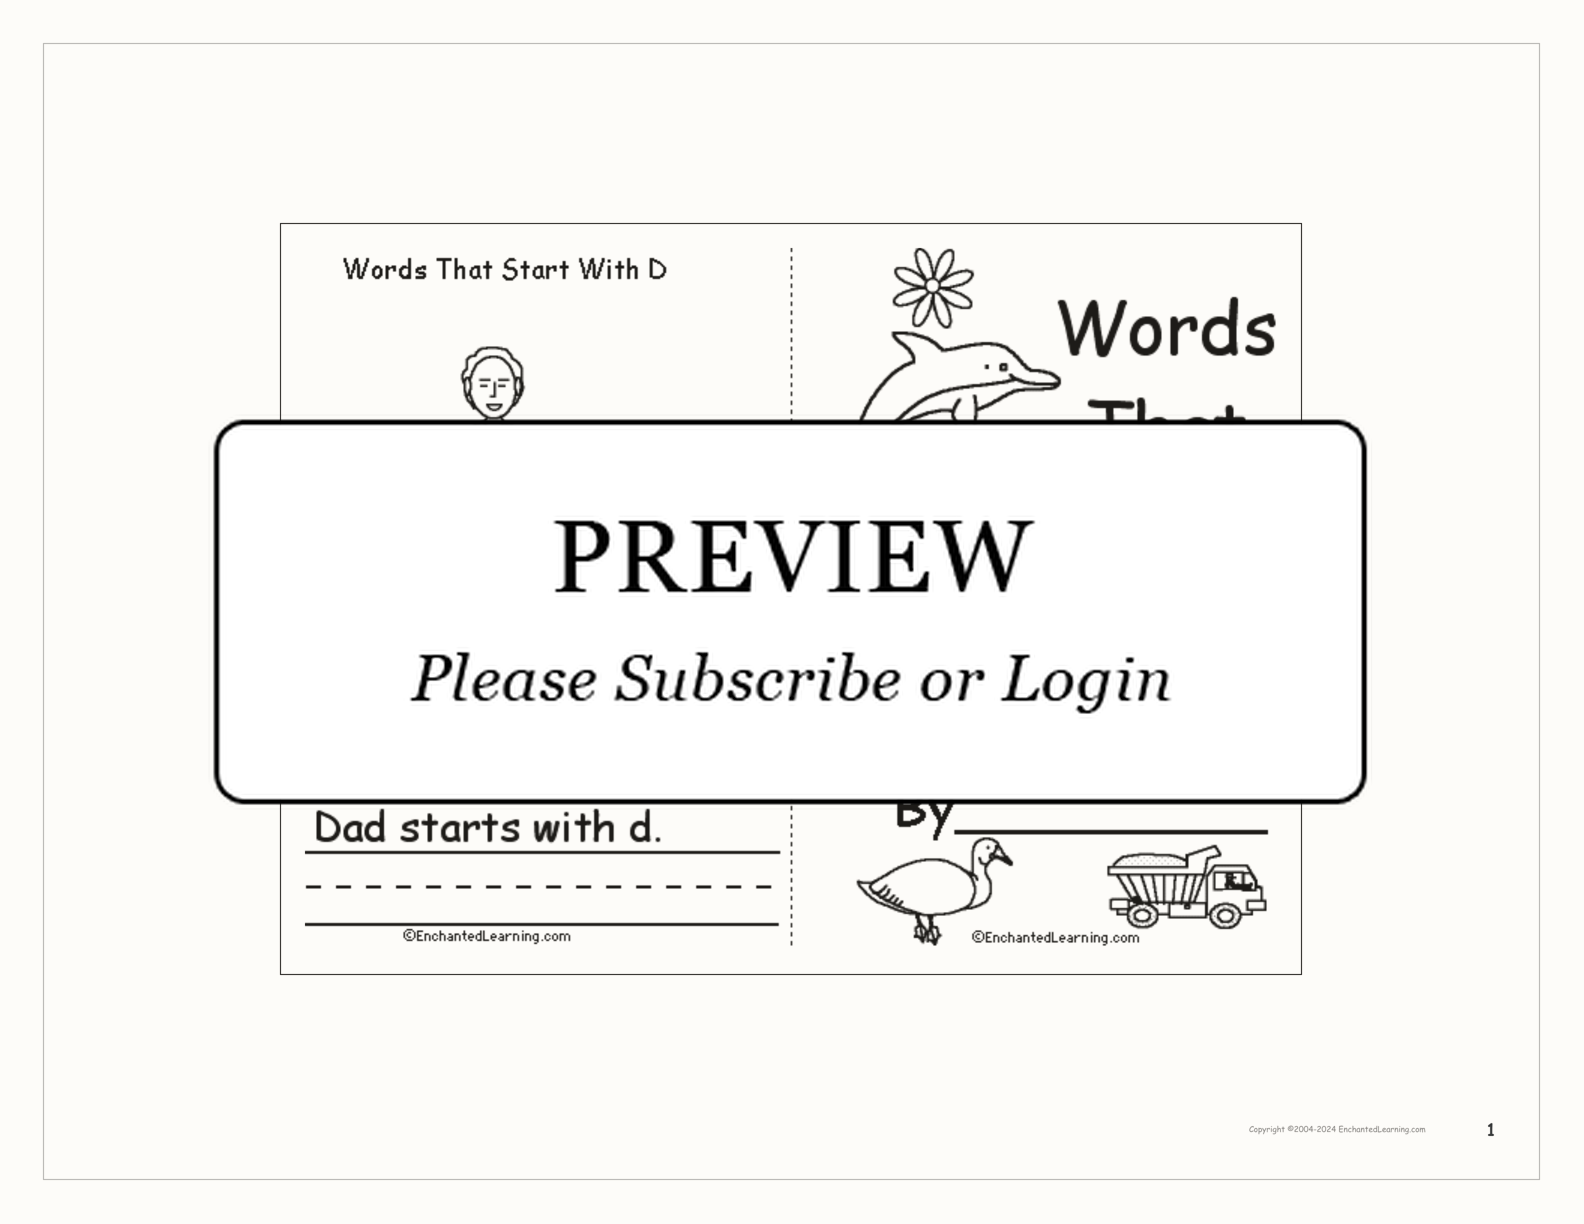 Words That Start With D Book interactive printout page 1